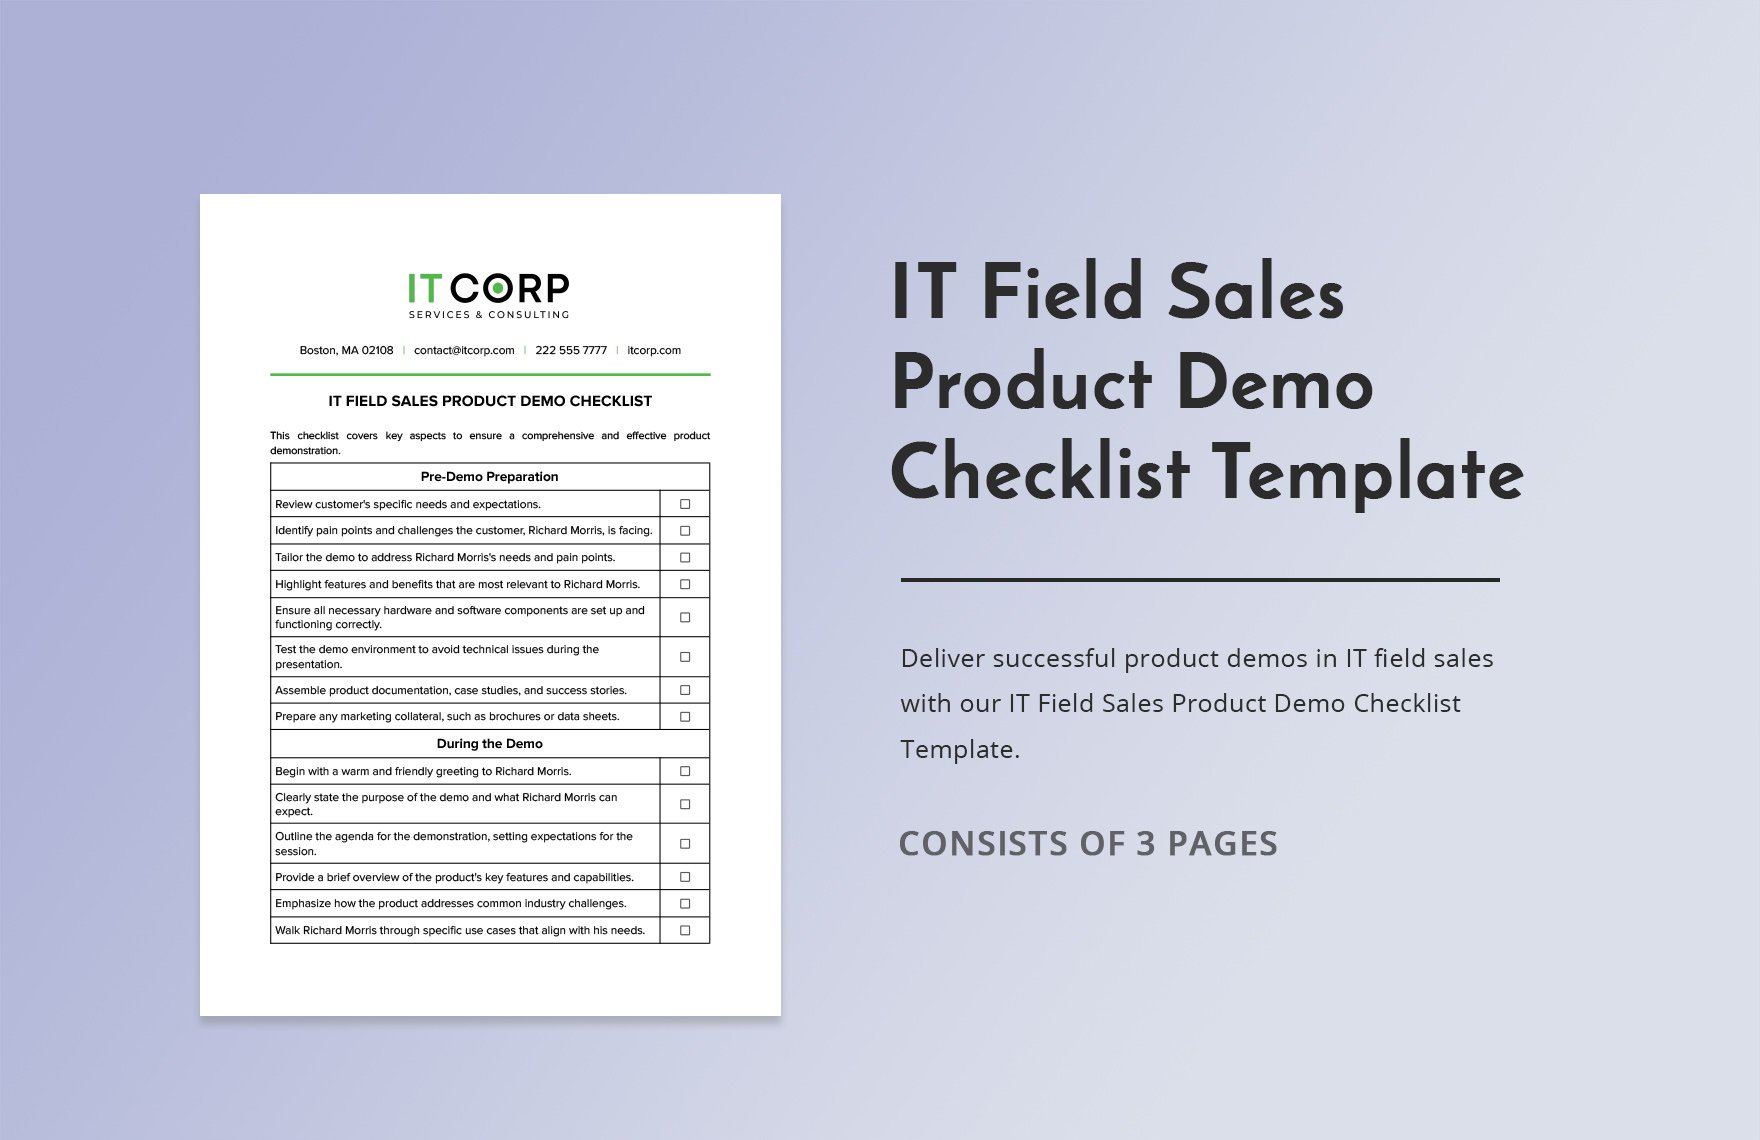 IT Field Sales Product Demo Checklist Template